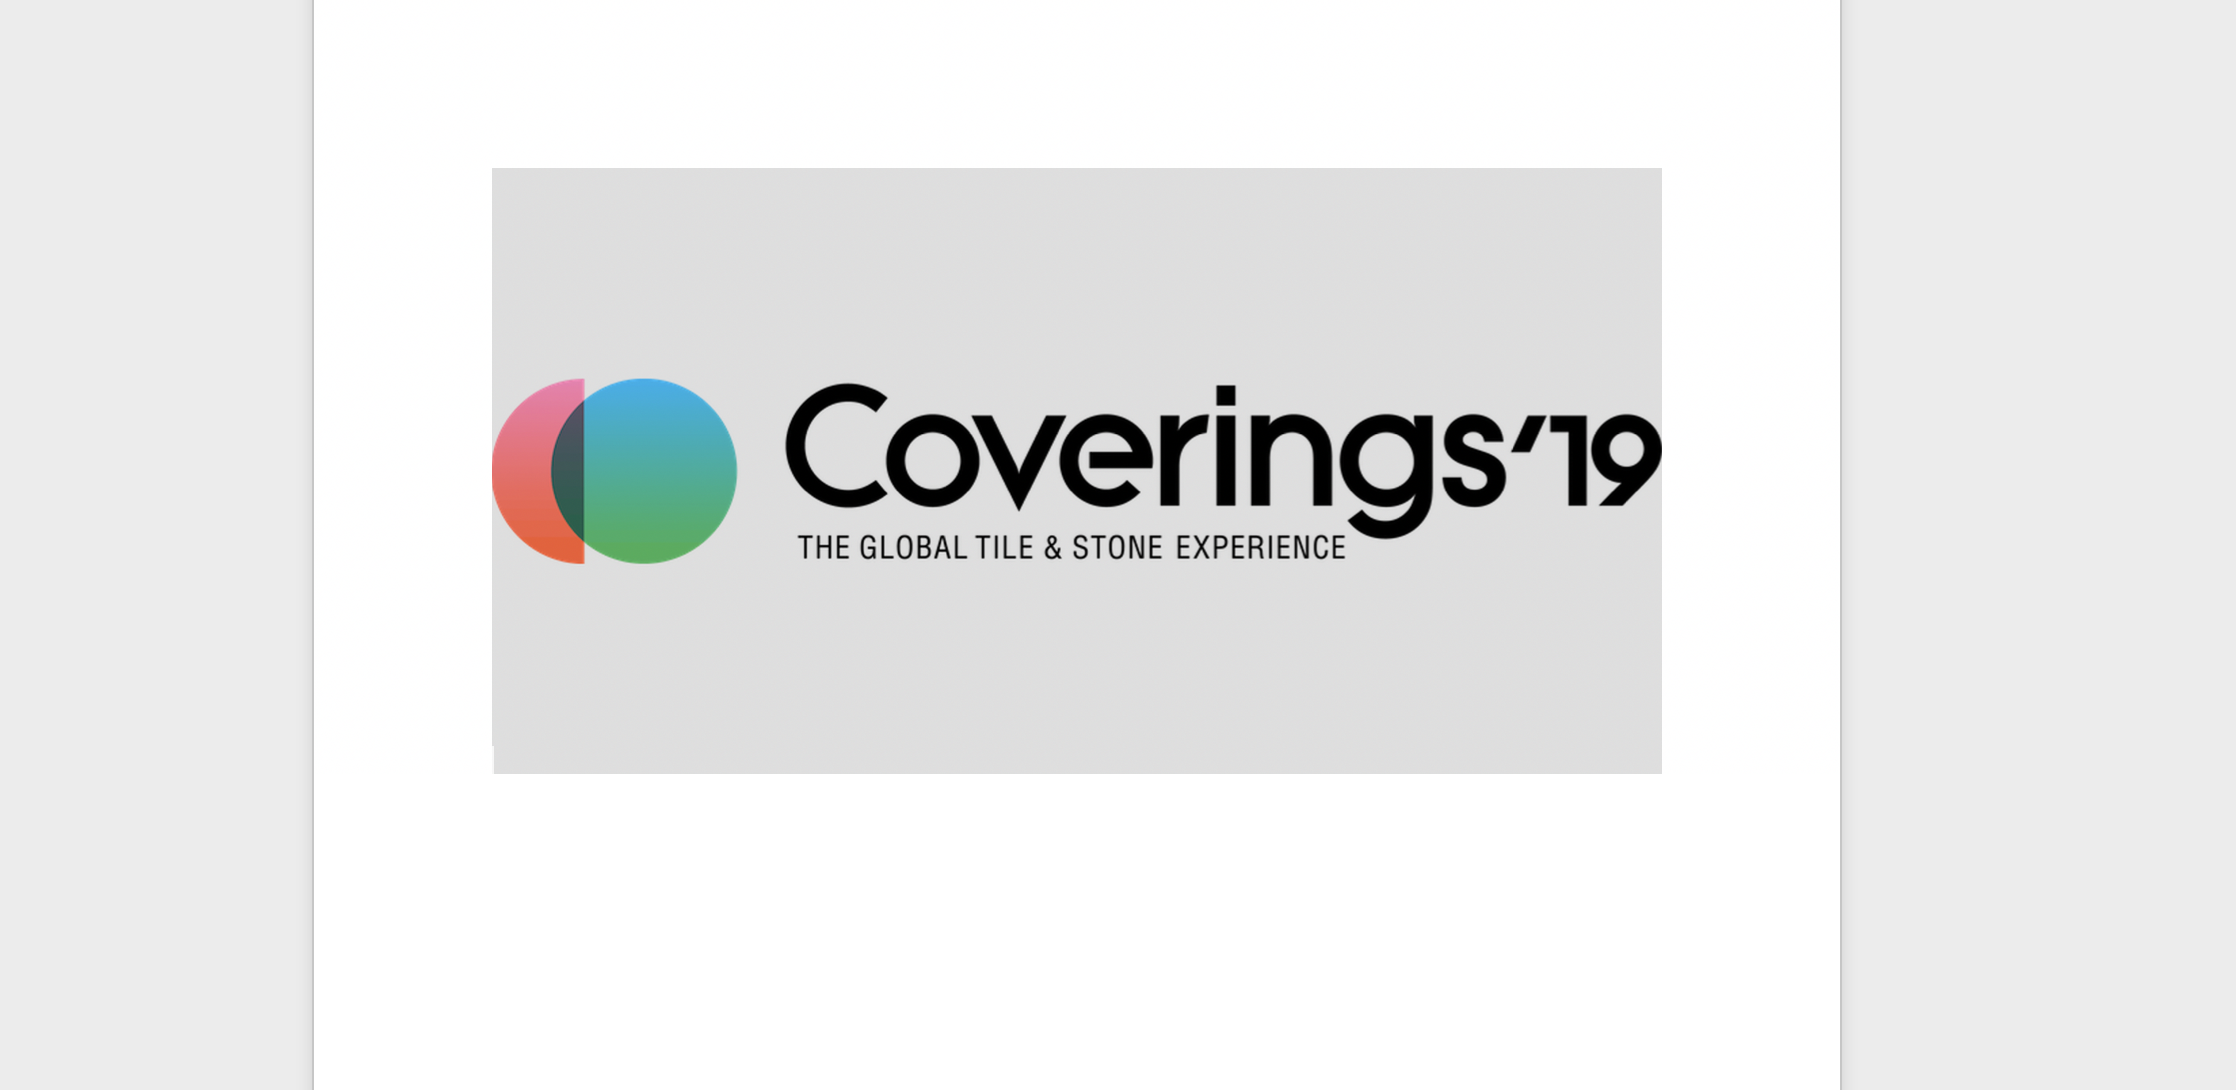 Coverings calls for top projects, emerging leaders in tile & stone